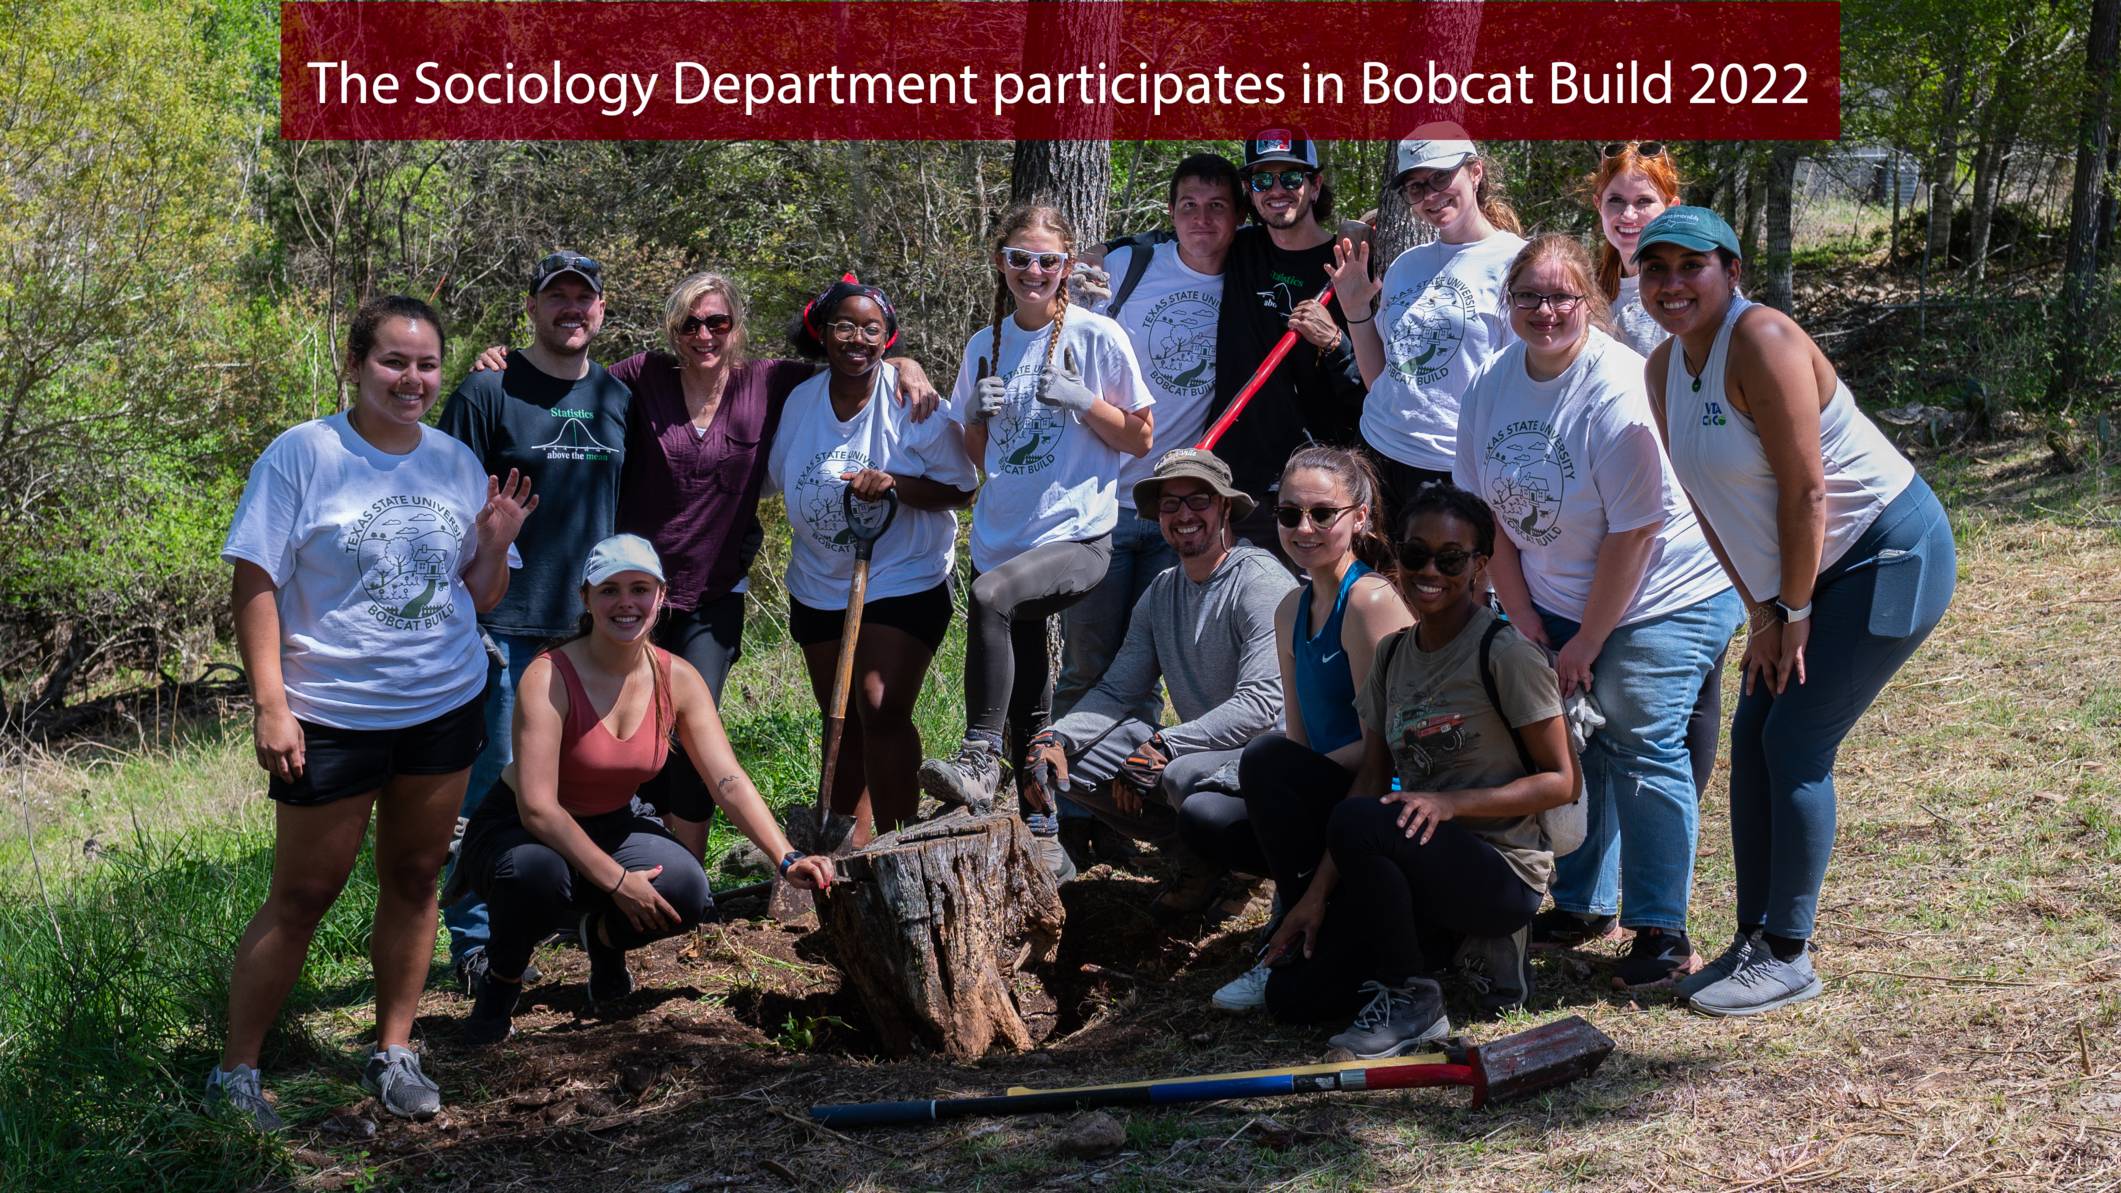 group photo of students faculty and staff that participated in bobcat build 2022